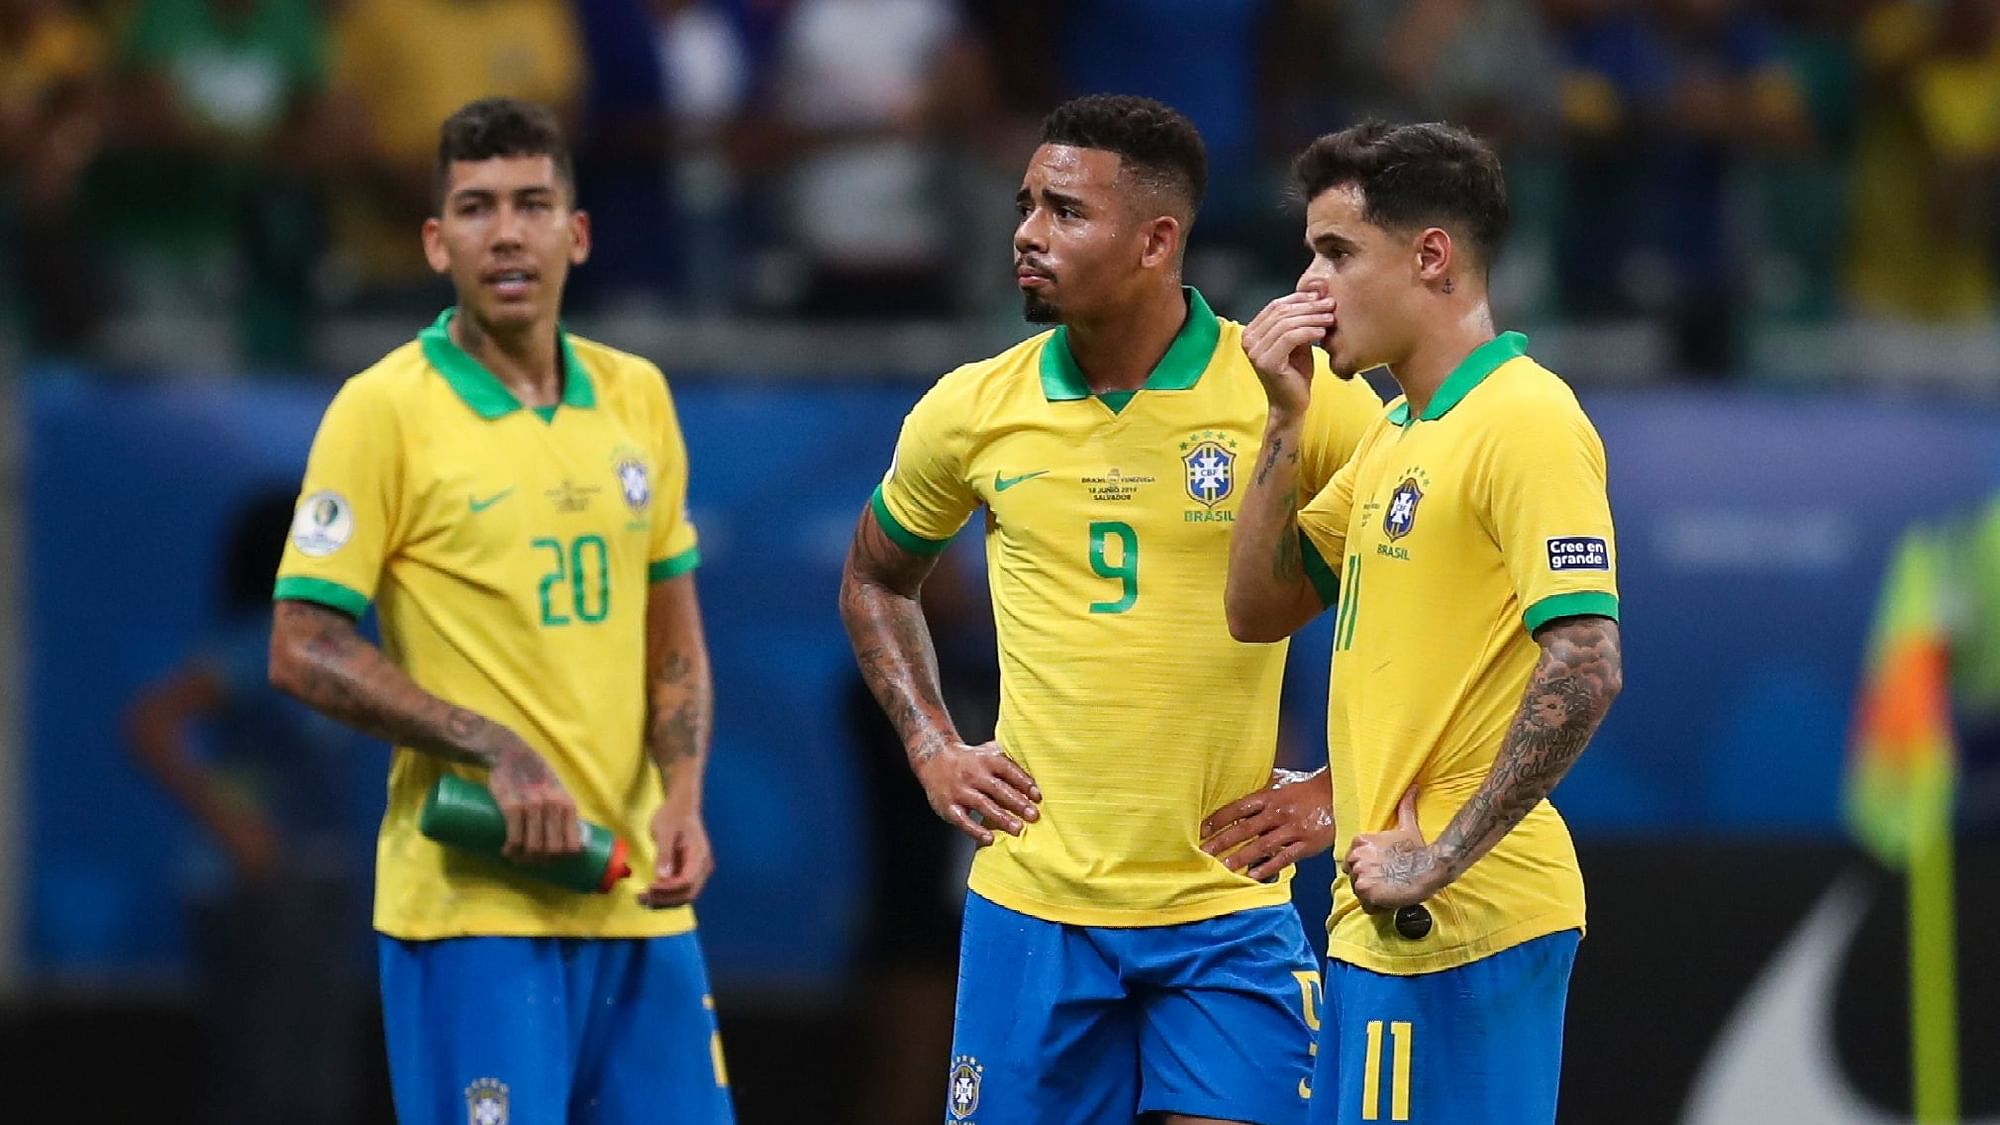 Brazil’s Gabriel Jesus (Center) waits for the referee to decide on his goal with teammates Roberto Firmino (Left) and Brazil’s Philippe Coutinho (Right) during a Copa America Group A soccer match at the Arena Fonte Nova in Salvador.